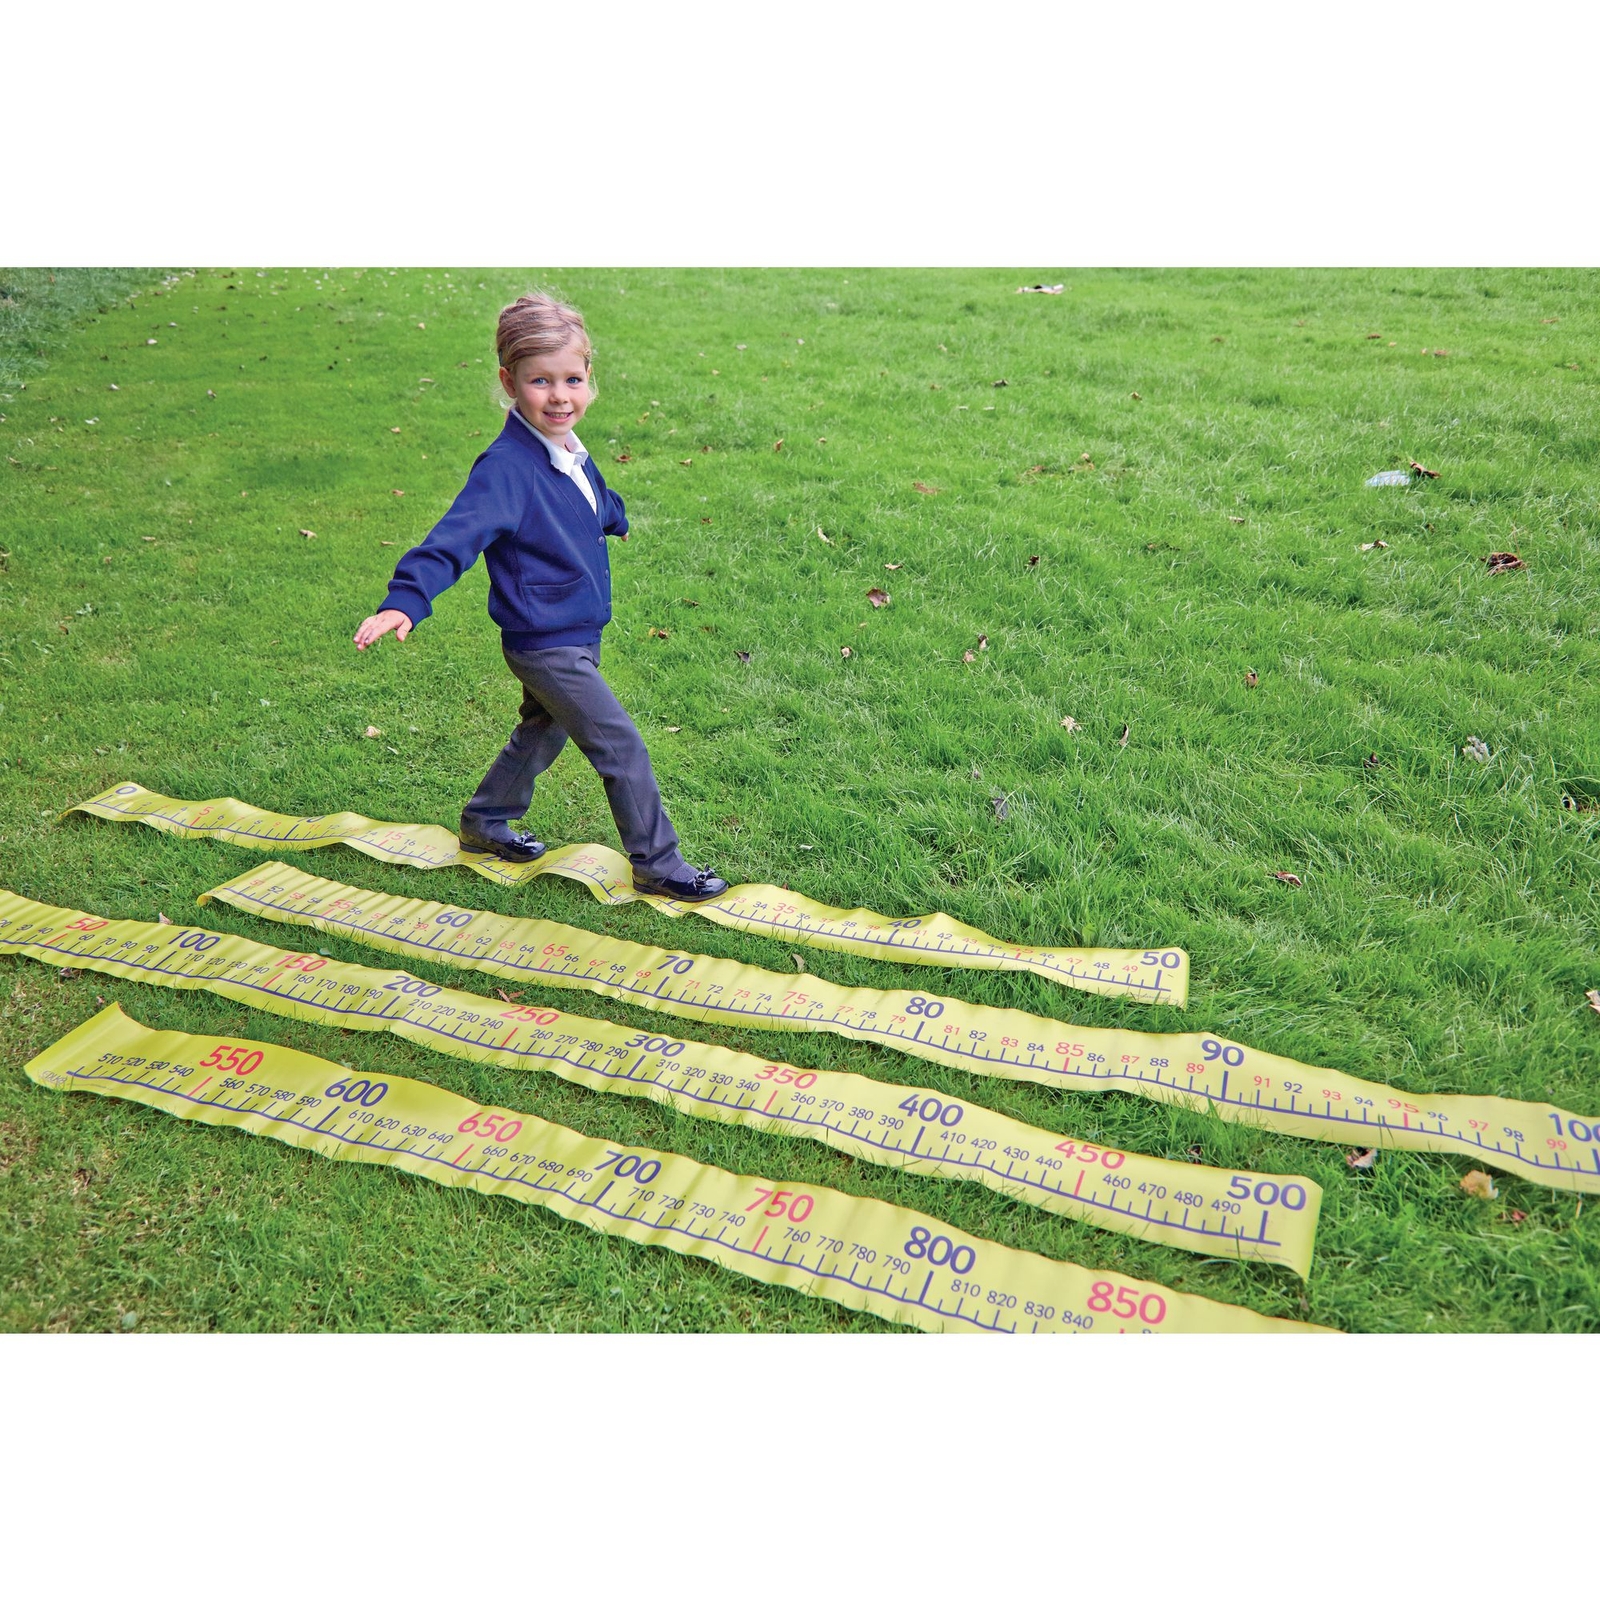 Giant Walk on Number Line - 2.4 metre sections - Pack of 4